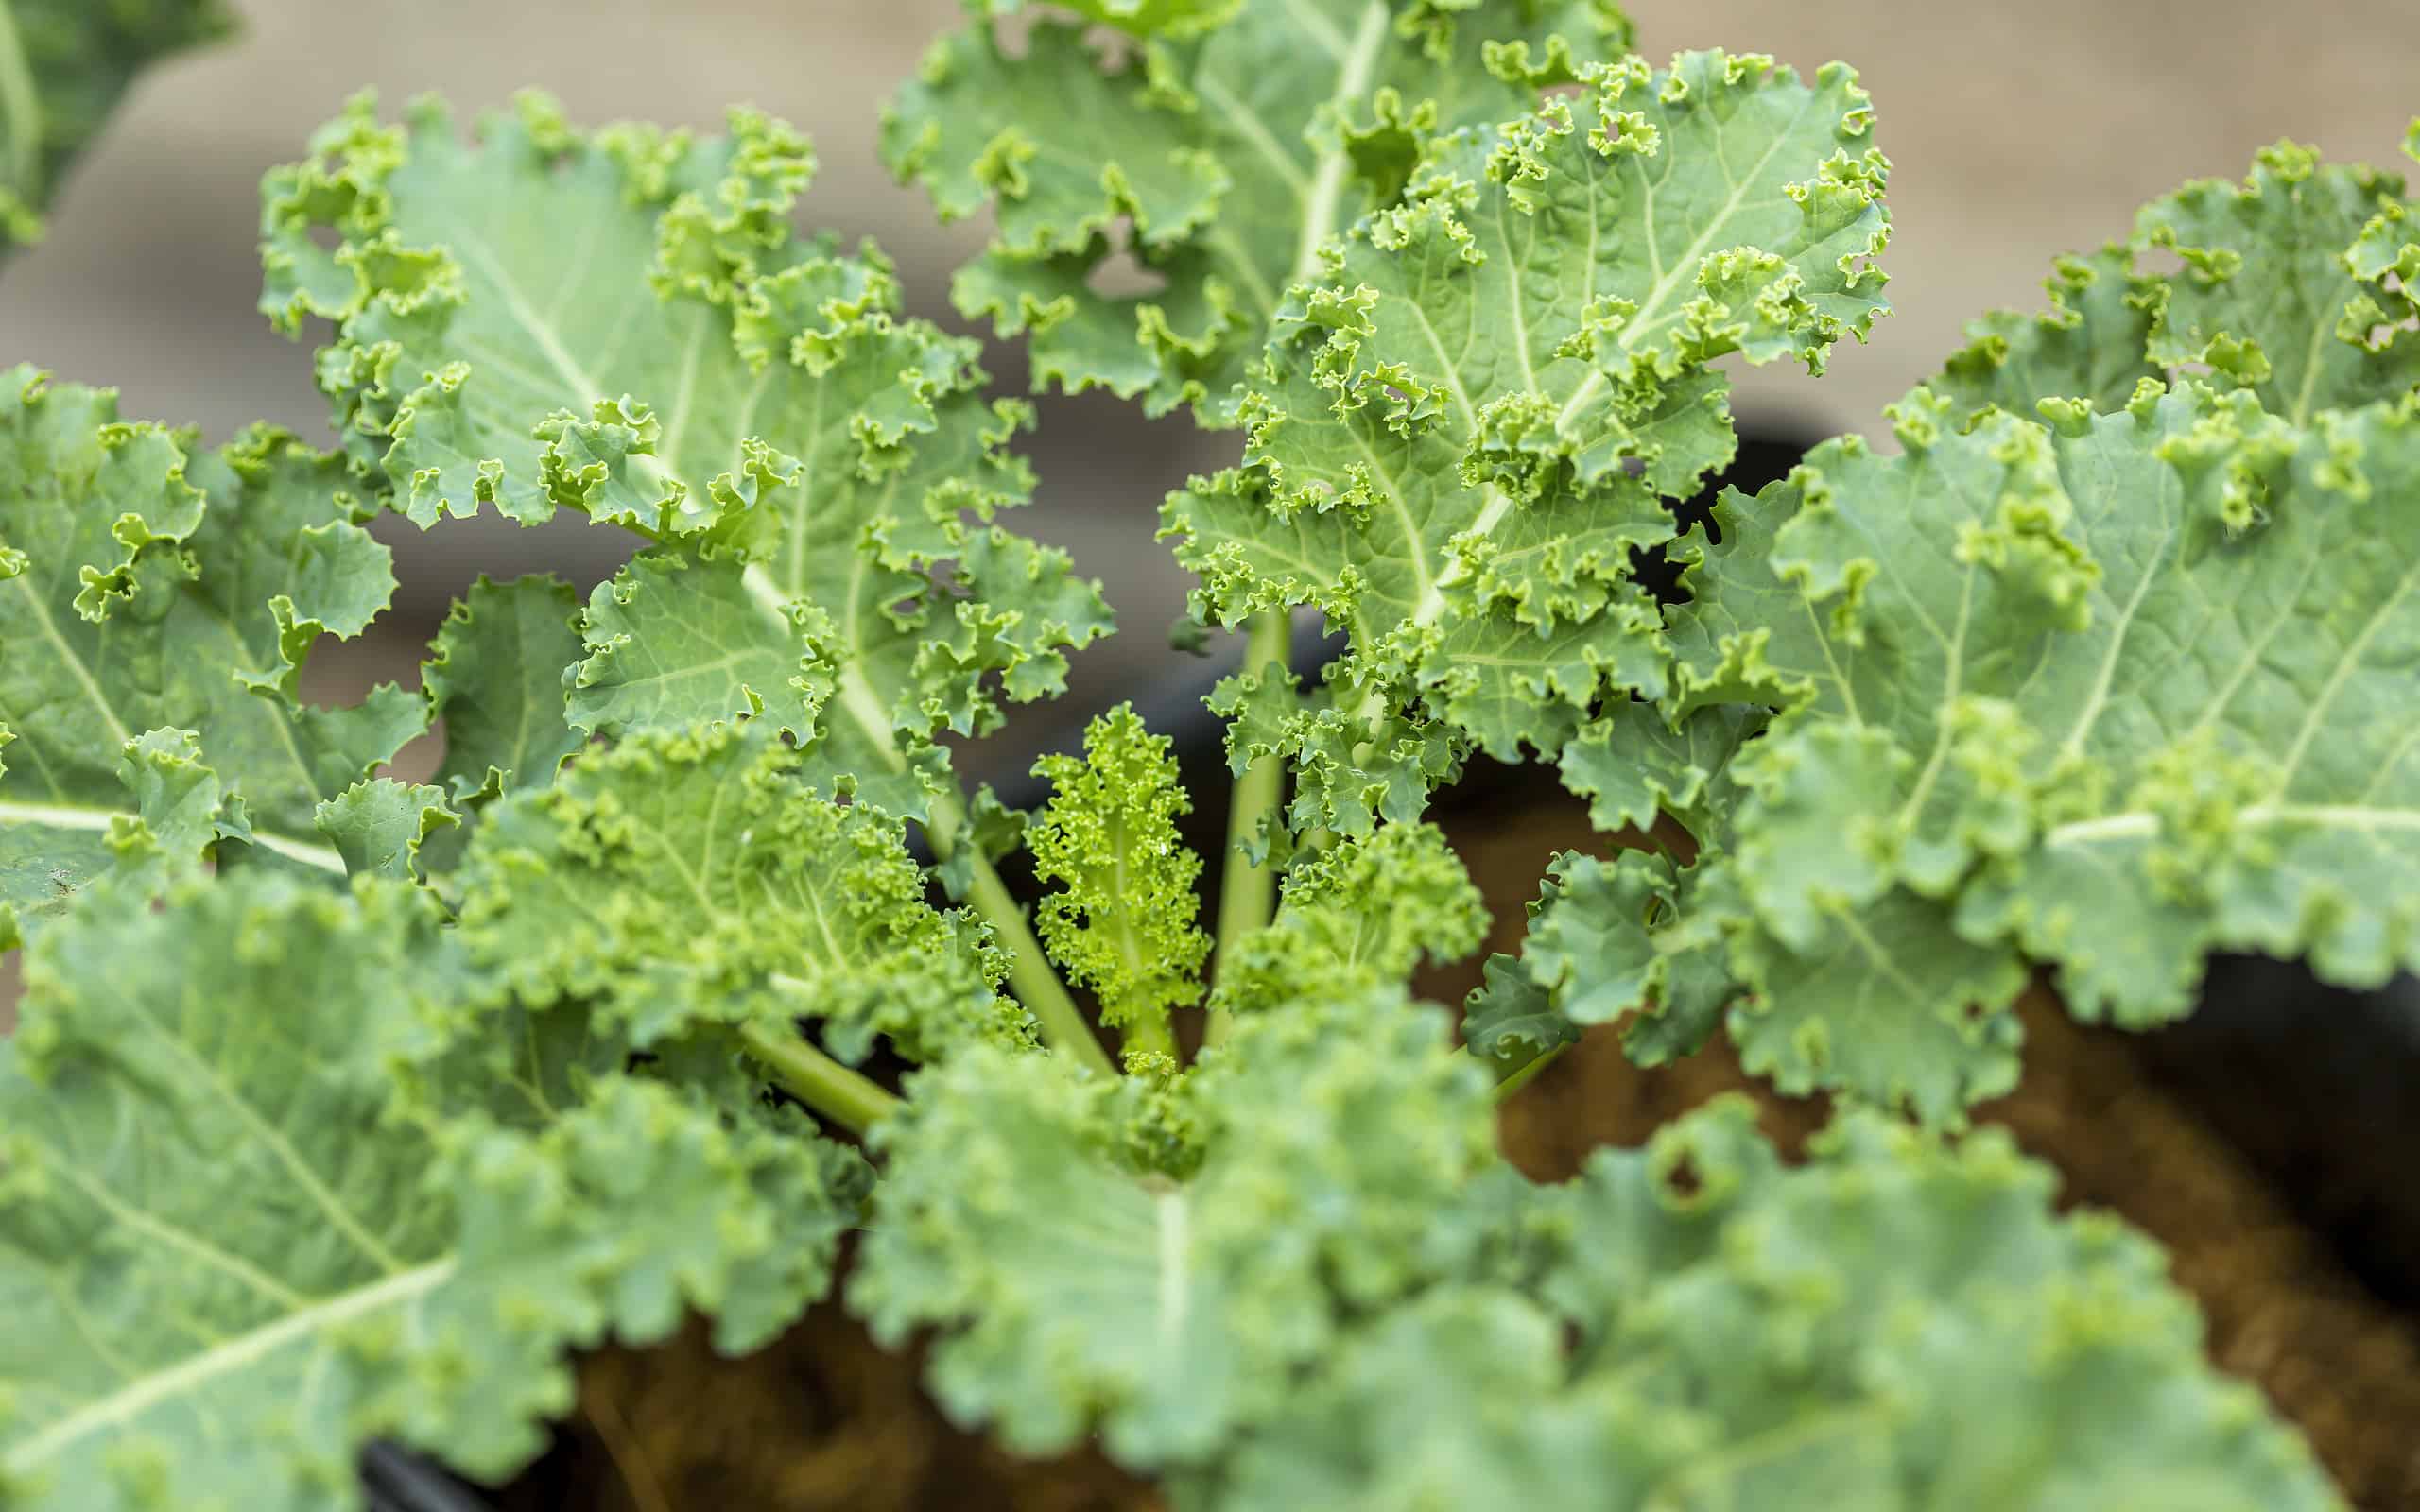 Kale is a perfect plant for your bearded dragon's diet and home.